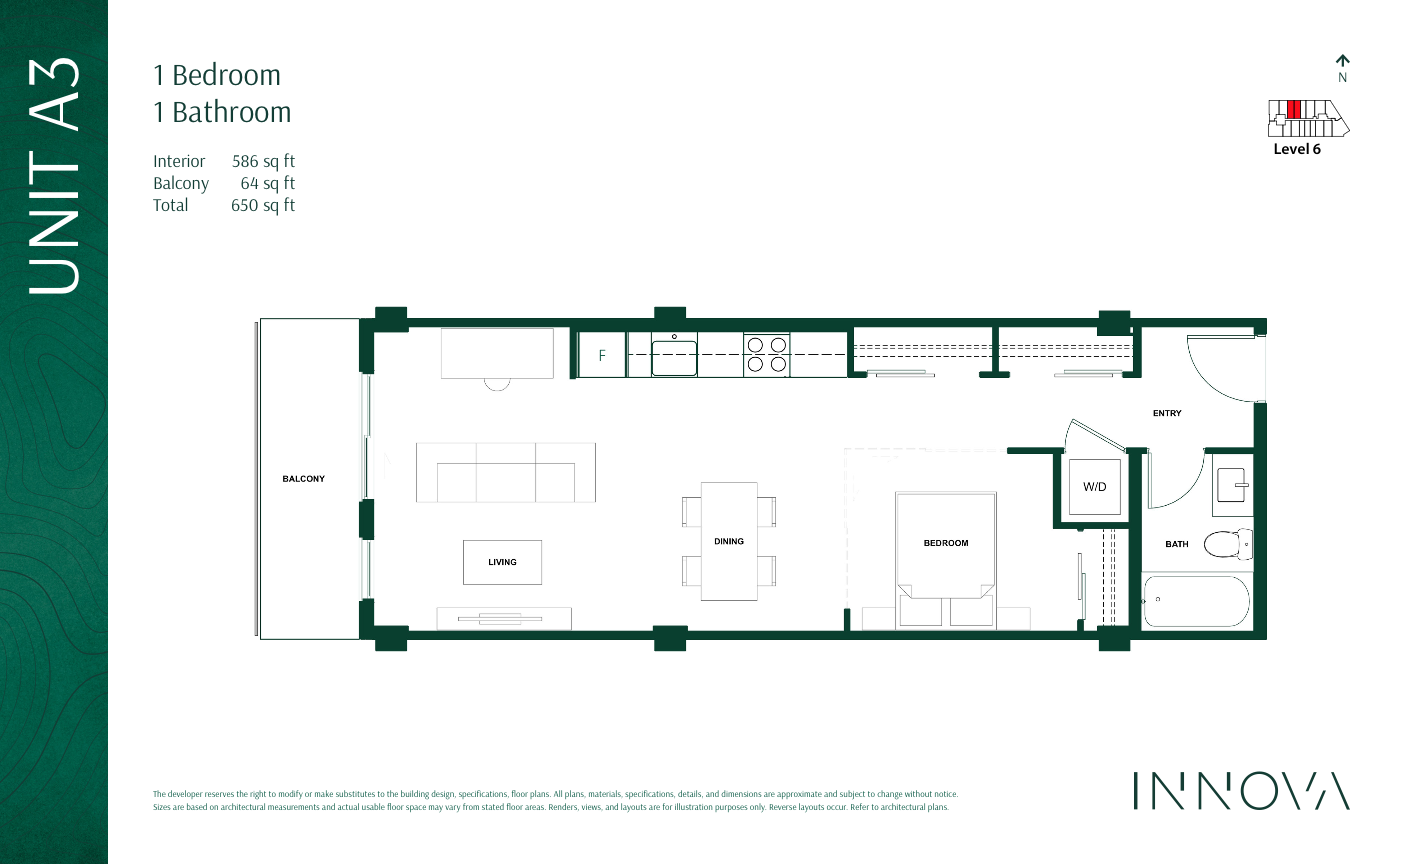  Floor Plan of INNOVA Condos with undefined beds